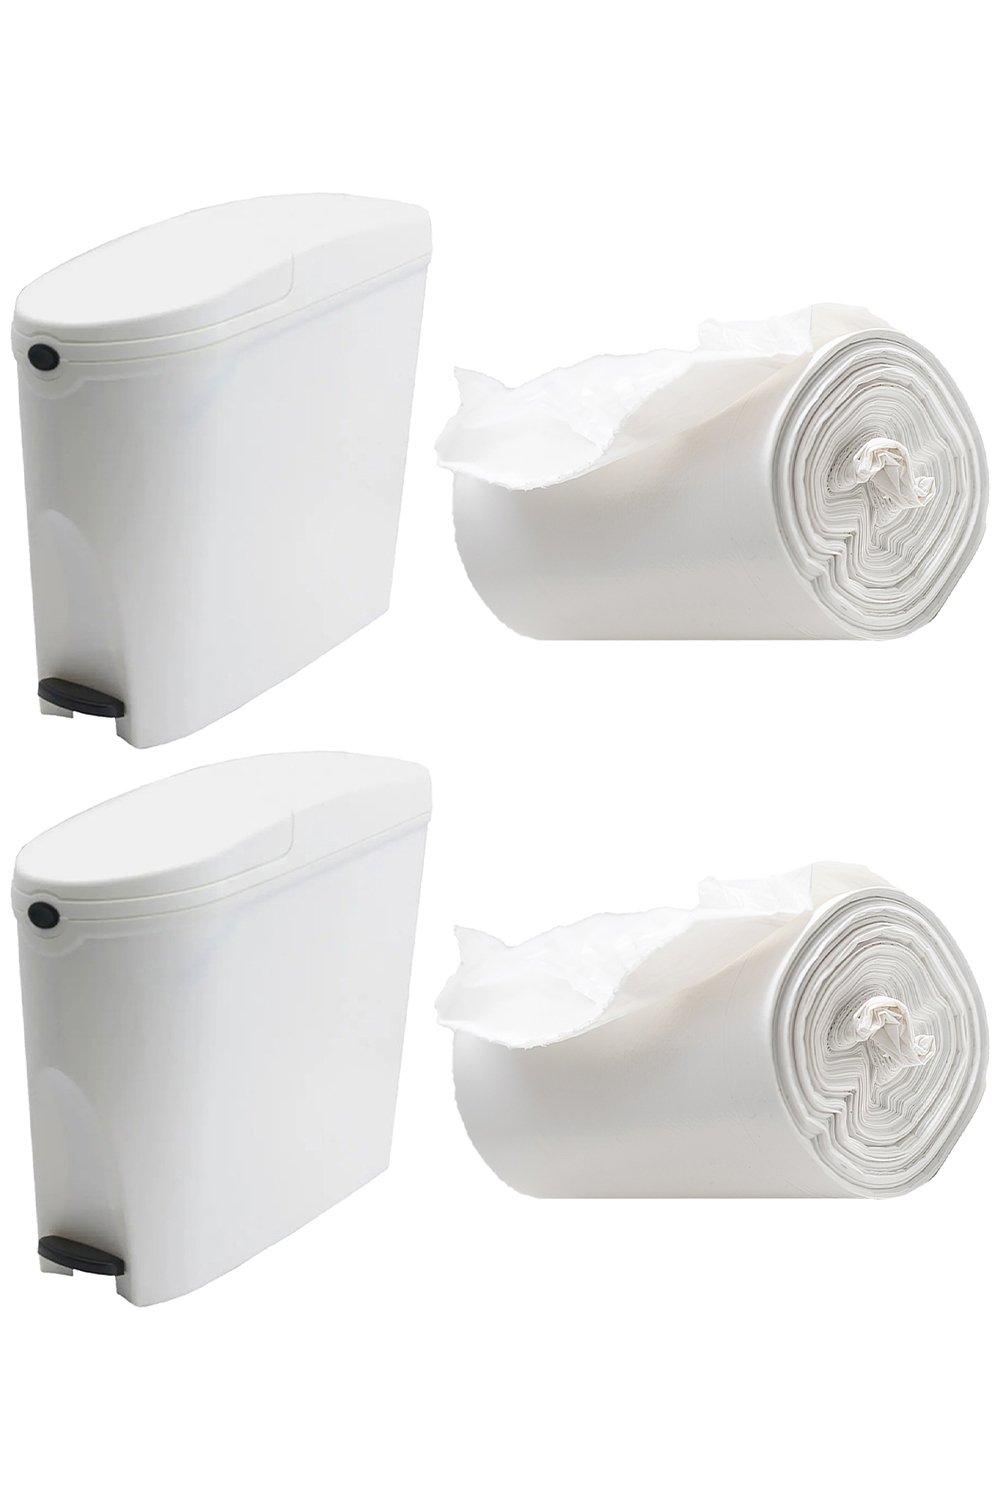 White Pedal Operated Toilet Sanitary Bin 2 x 20L Capacity & 100 Liners